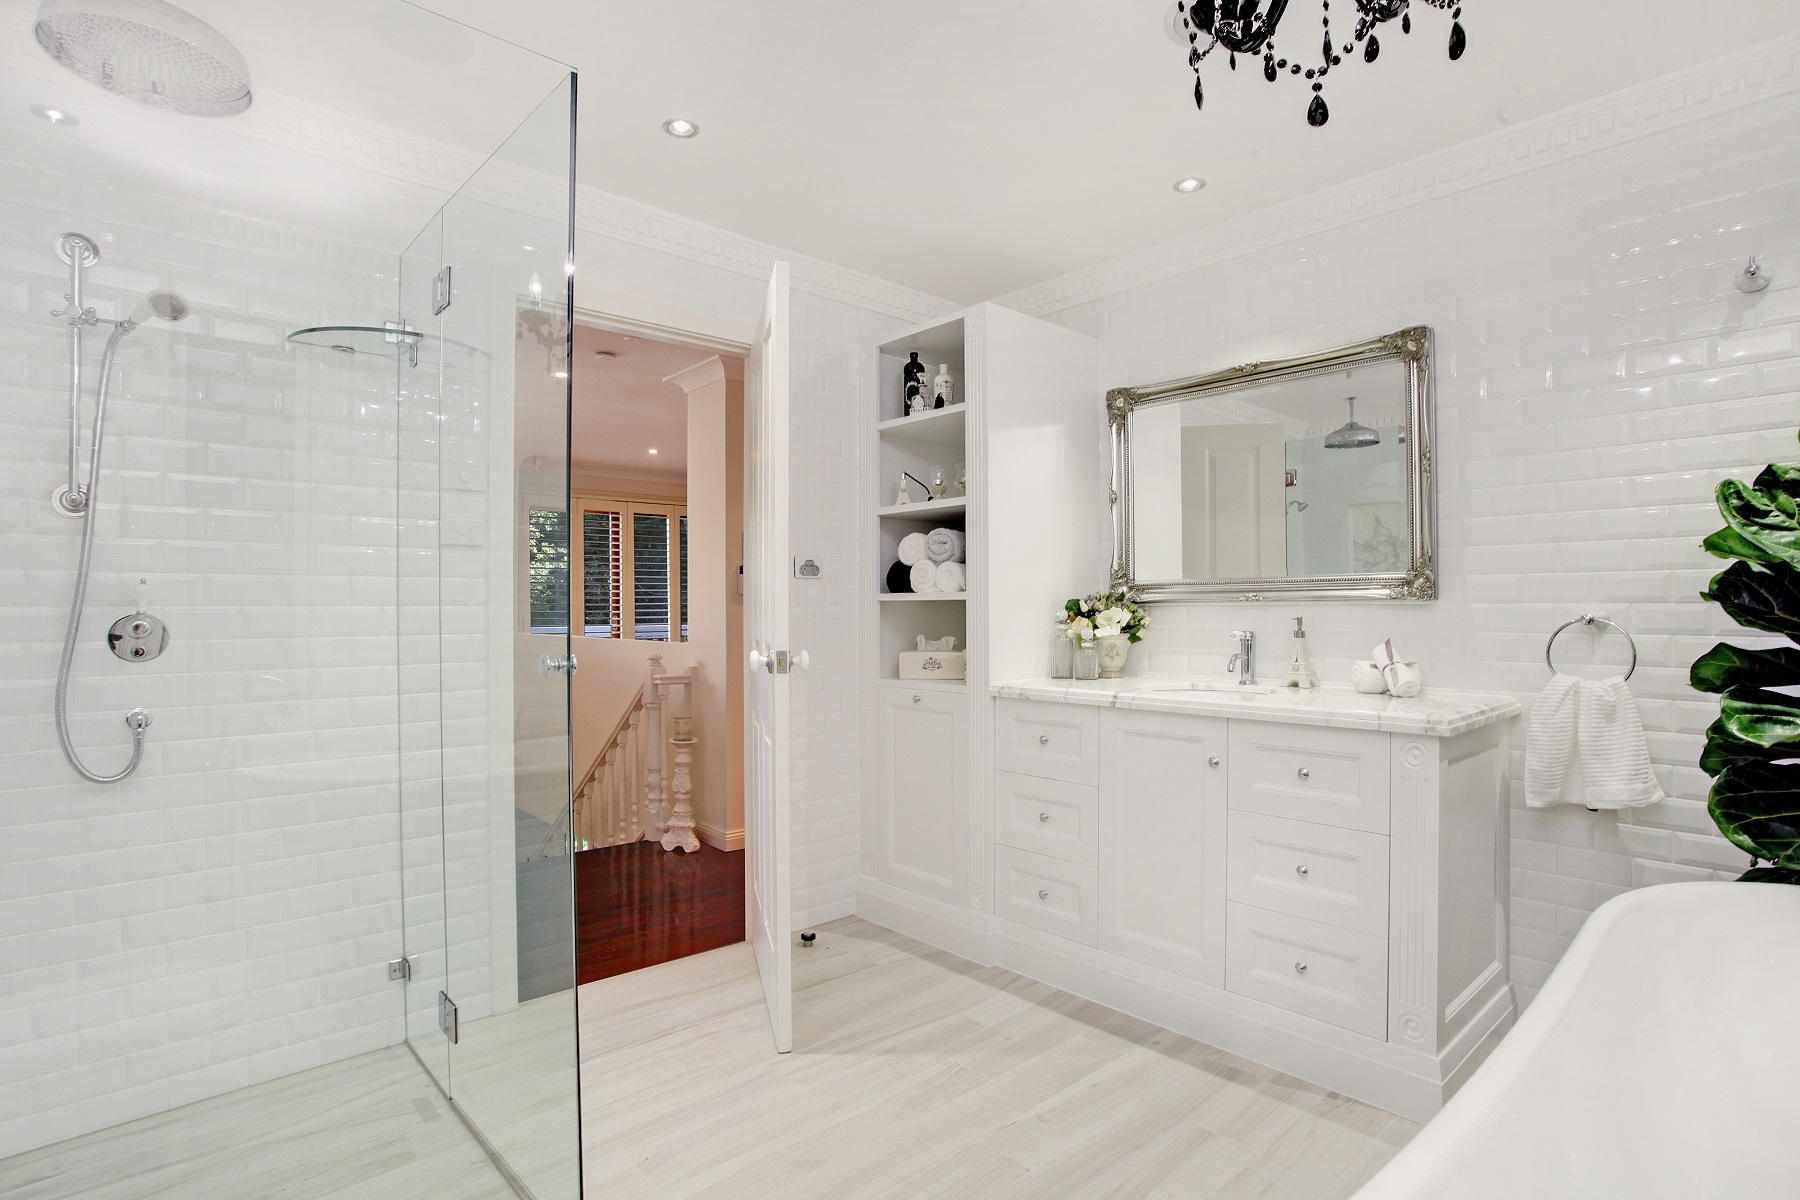 Provincial style vanity with a marble top - Alfords Point, Sydney